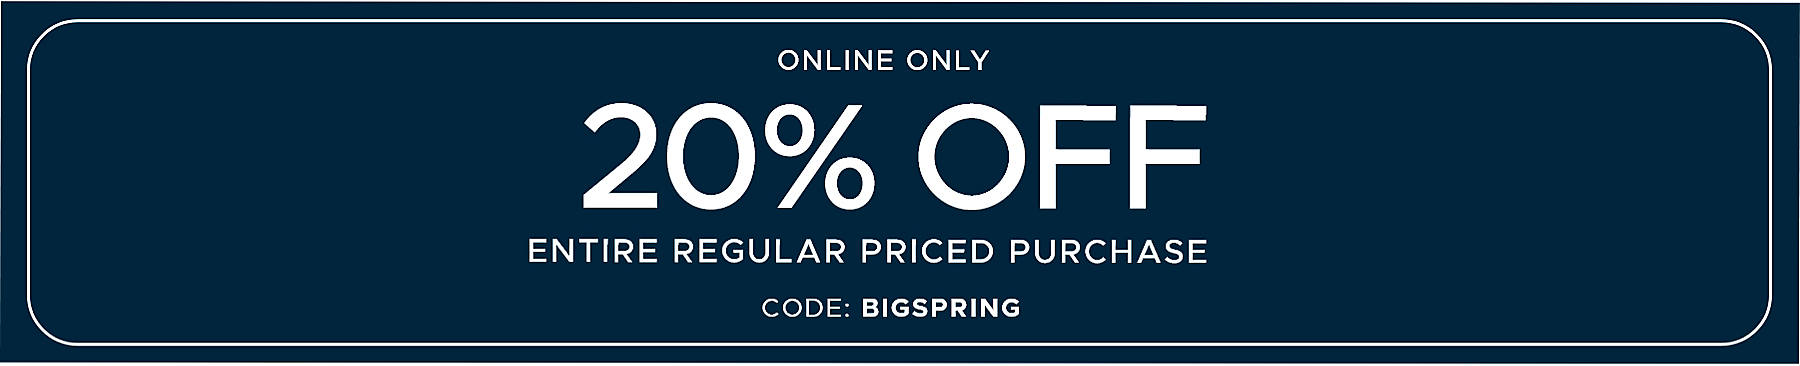 Online Only 20% off Entire Regular Priced Purchase code: BIGSPRING